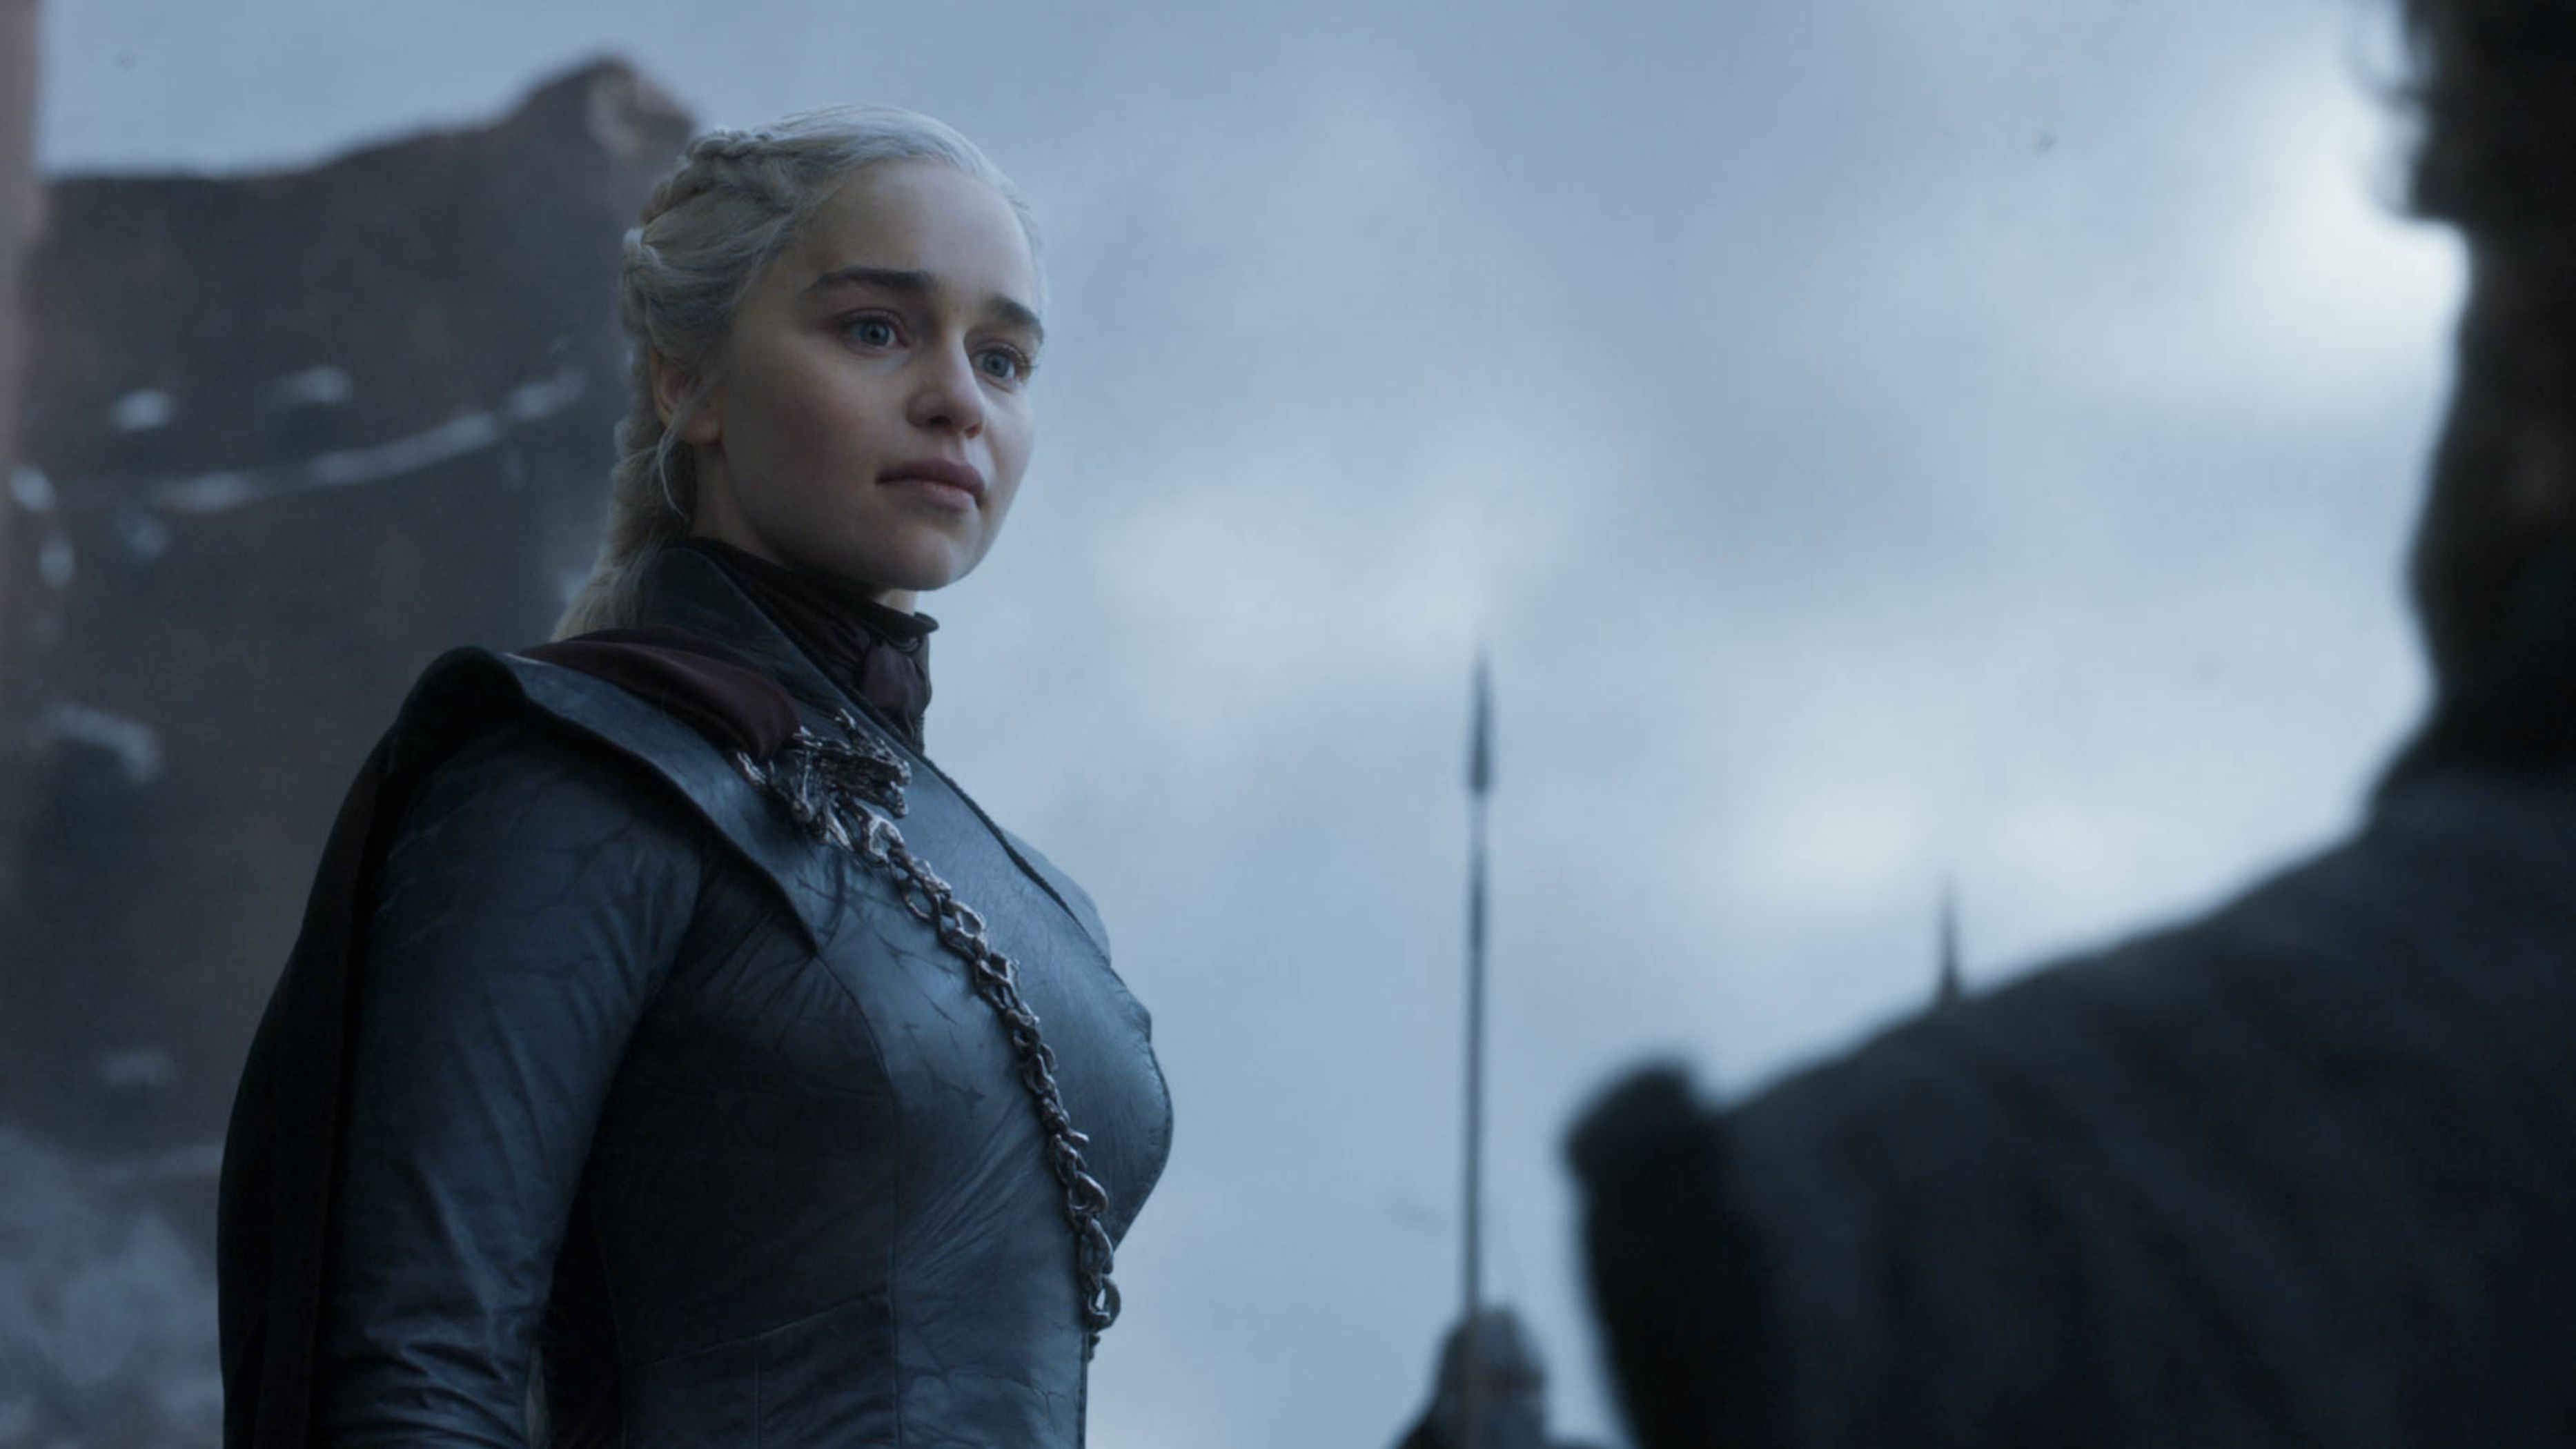 And now our watch has ended: Why of Thrones' is much its ending